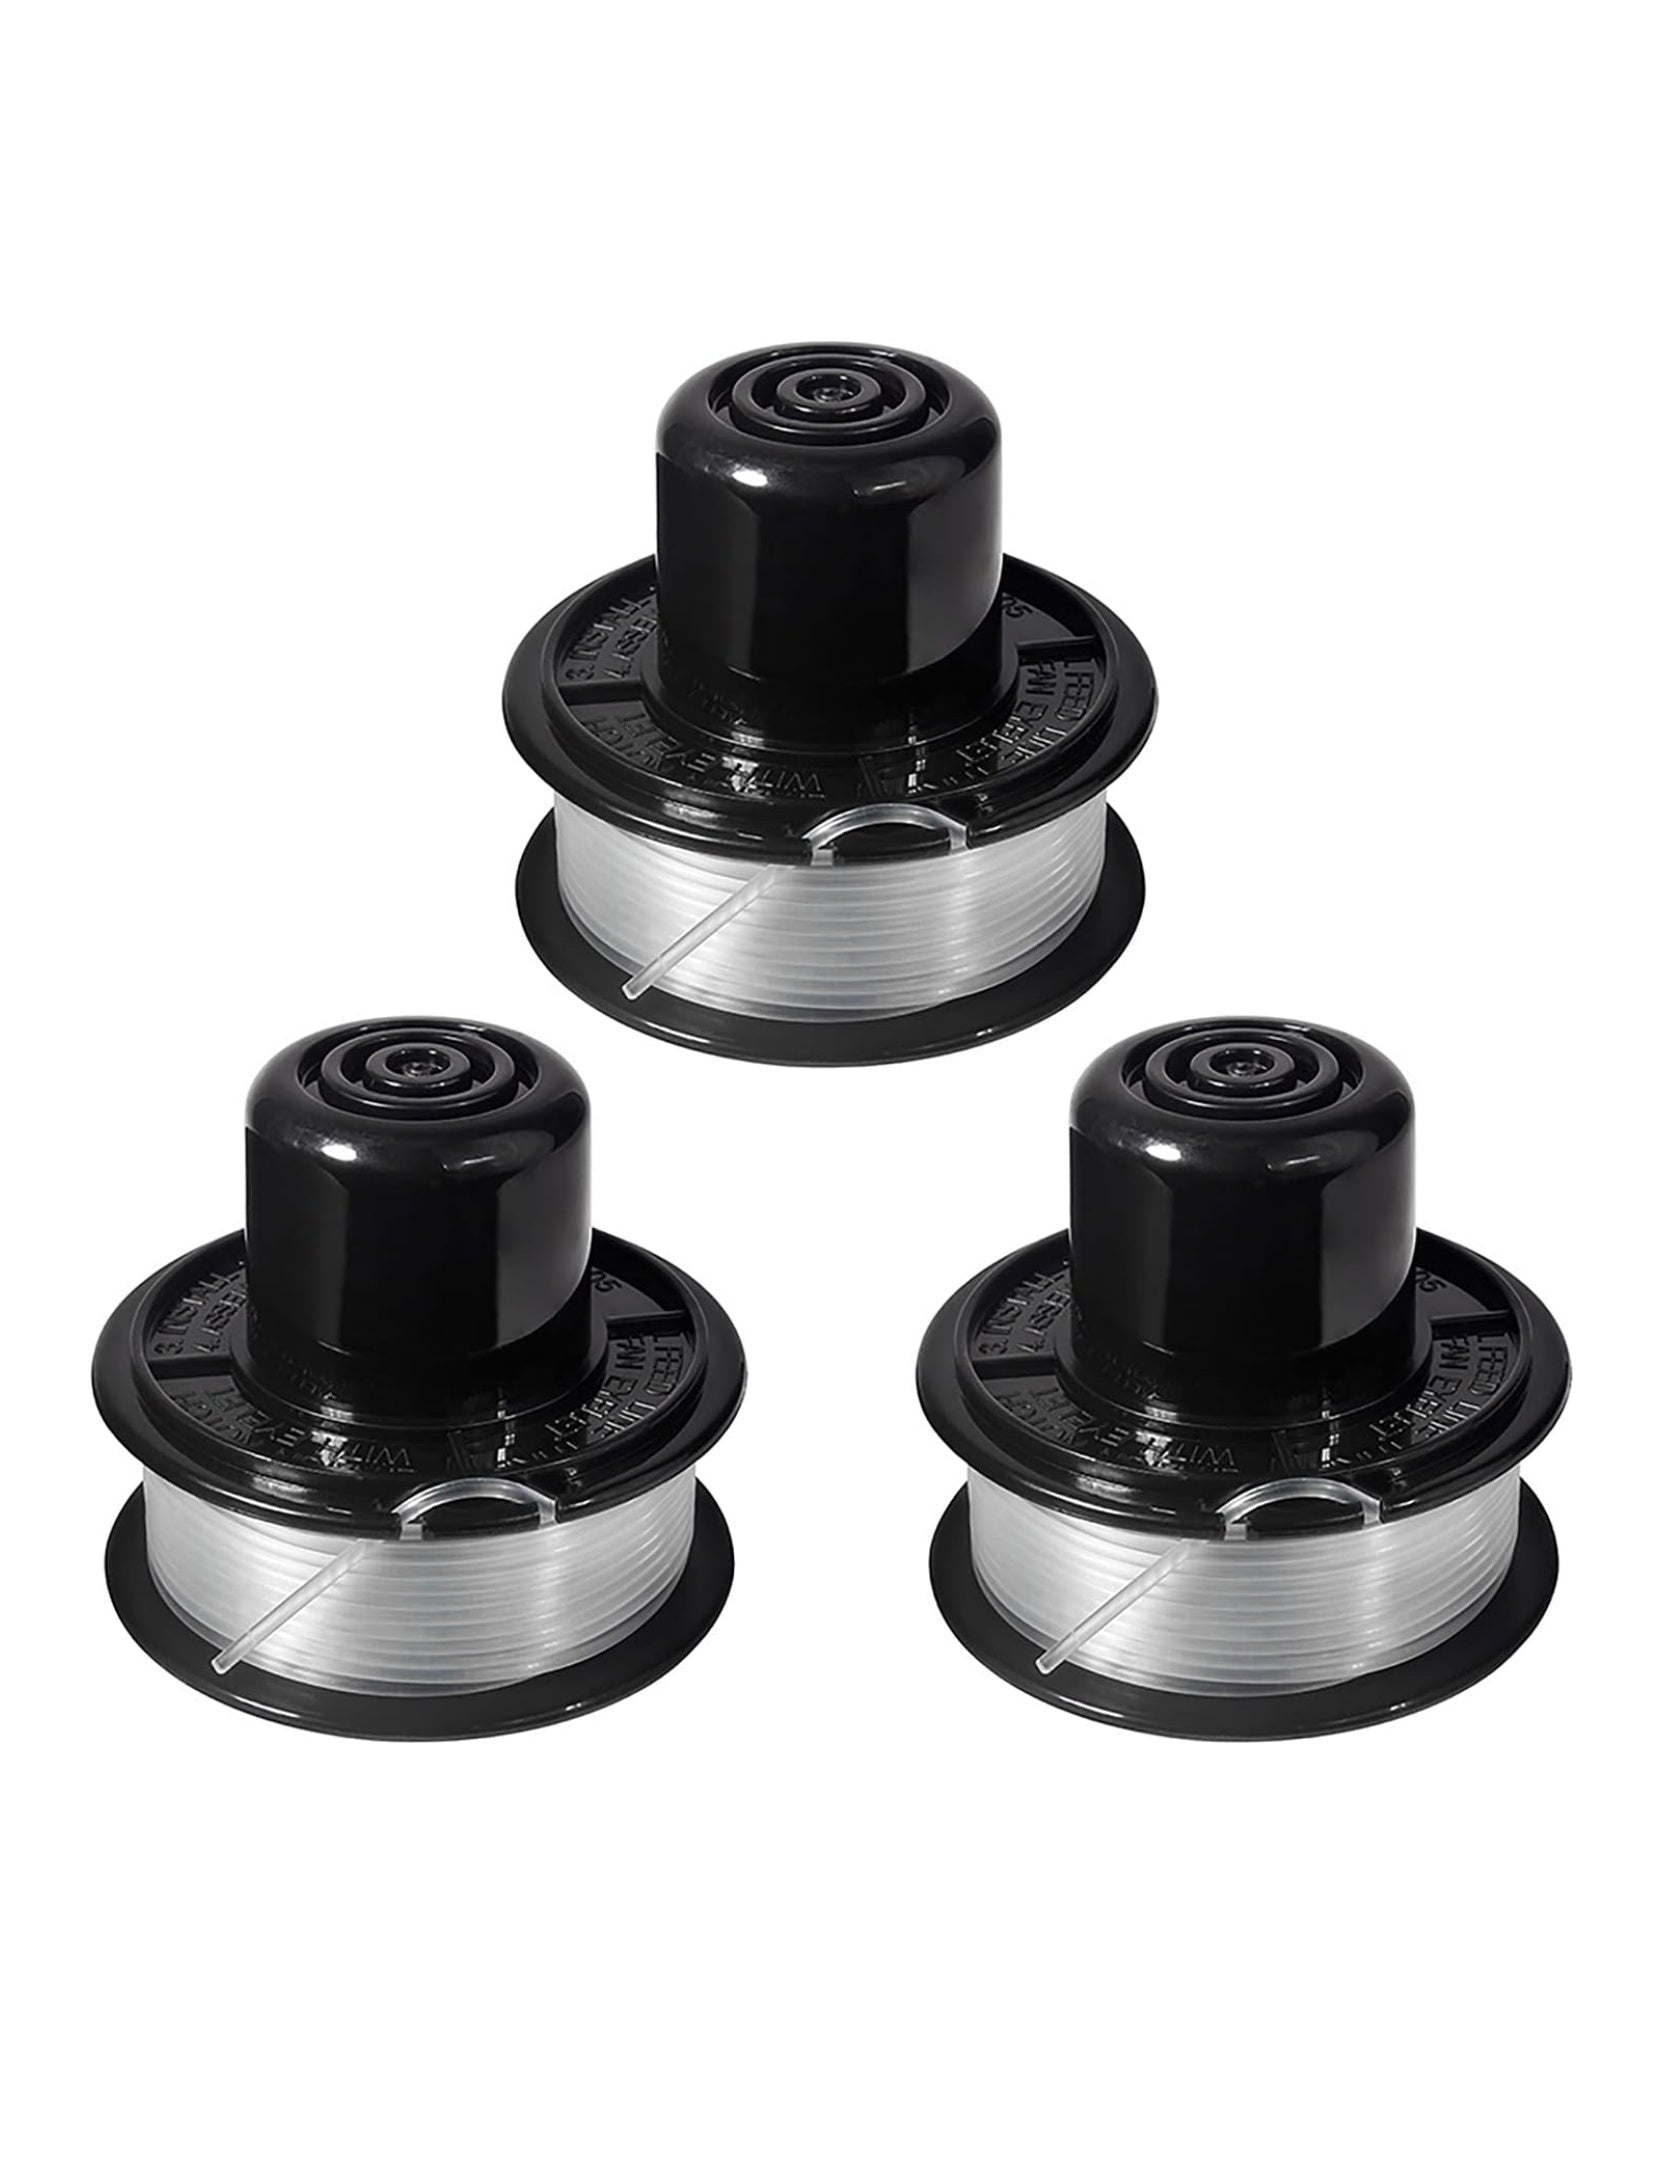 THTEN RS-136 Trimmer Spool Line Compatible with Black Decker 20ft 0.065" RS-136-BKP CST800 GE600 ST1000 ST200 ST300 ST3000 ST400 ST4000 ST4400 ST4500 ST5000 ST6800 Auto Feed Spool Edger Refills